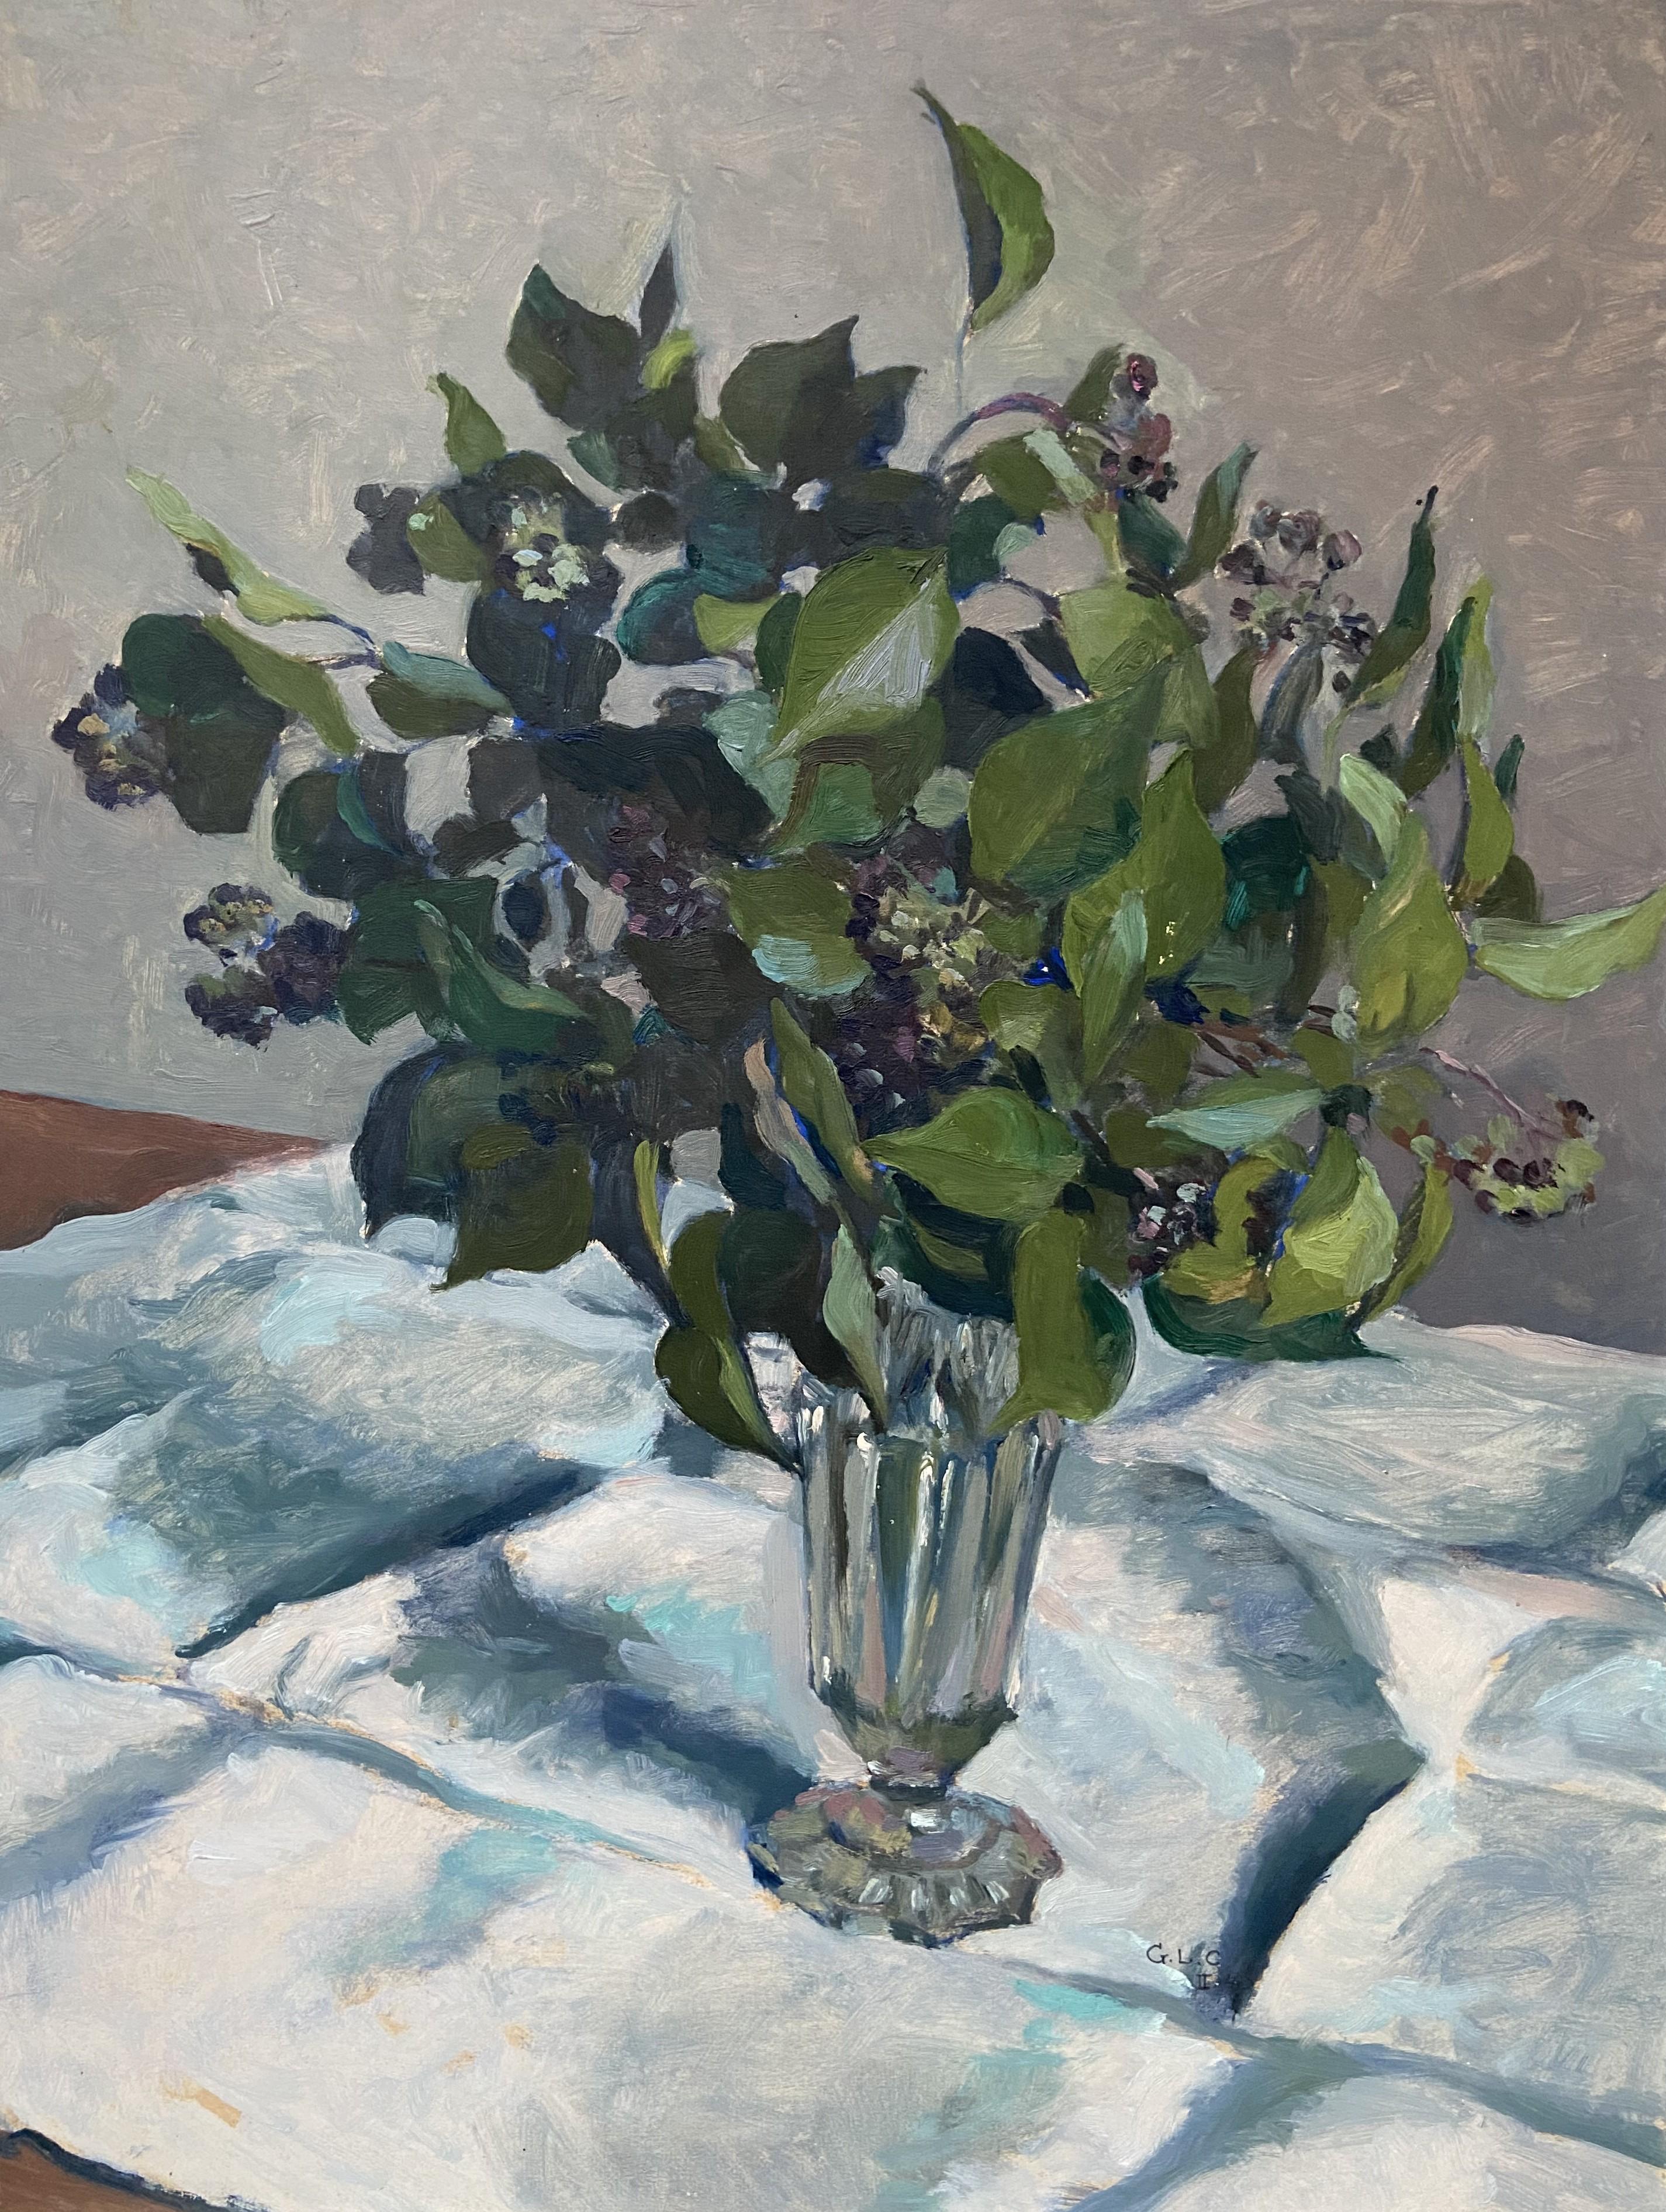 Georges Louis Claude (1879-1963)
A bouquet of blue flowers
signed with the initials GLC and dated "II 40" in the lower right
oil on paper 
62 x 47 cm
In good condition traces of pins in the corners
Framed : 66 x 51 cm

Georges Louis Claude was born